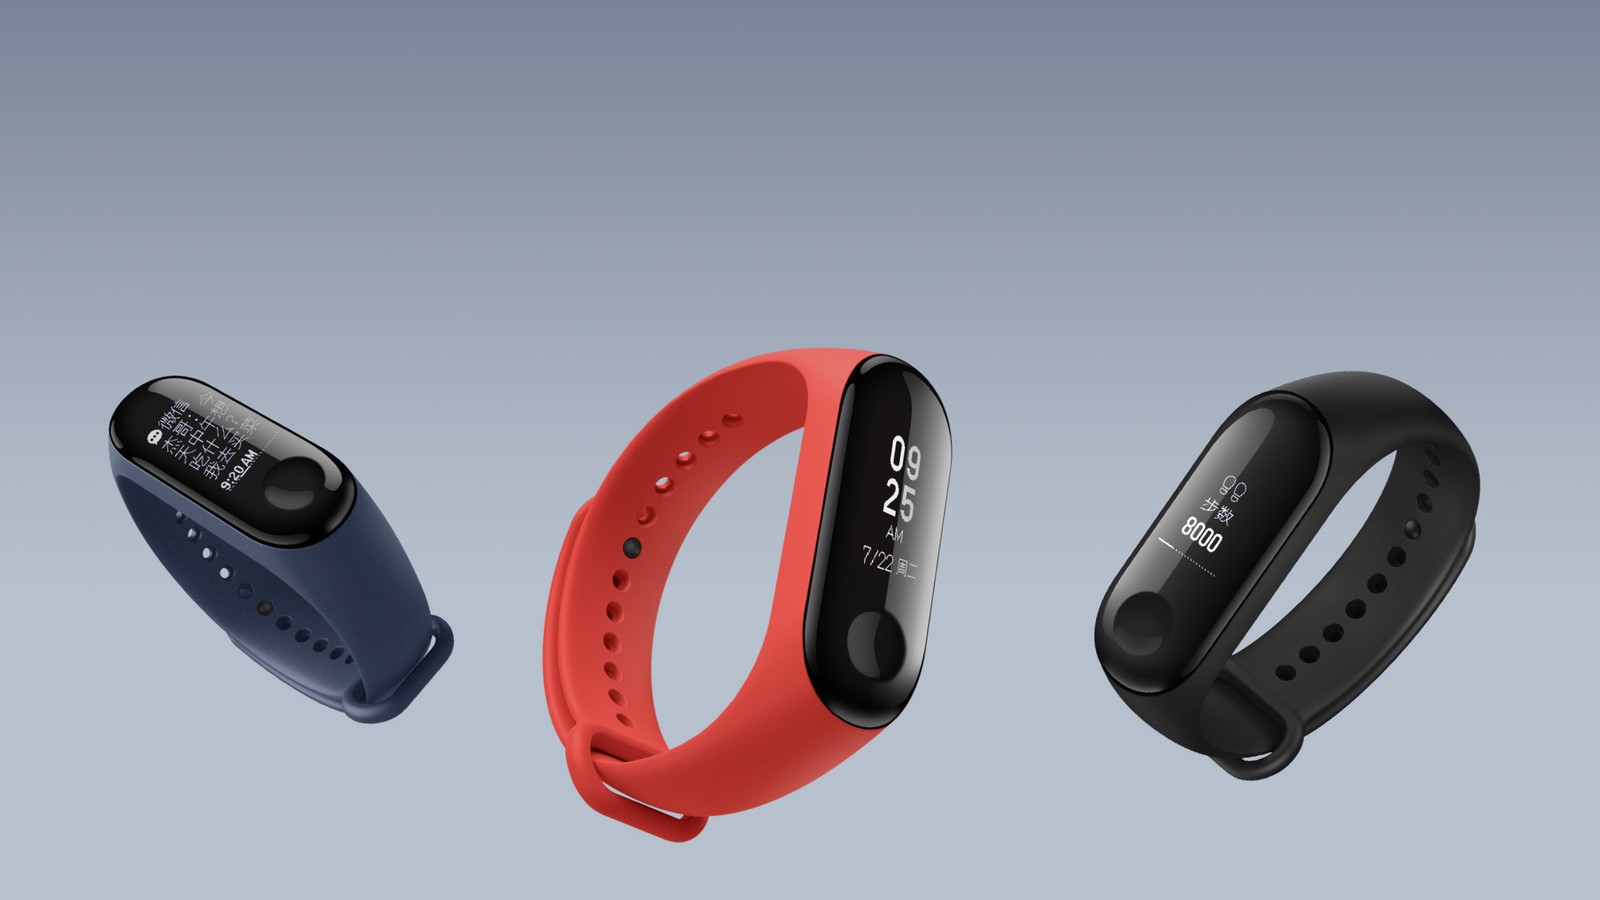 Xiaomi Mi Band 3 Brings Fitness Tracking Features At Low Cost